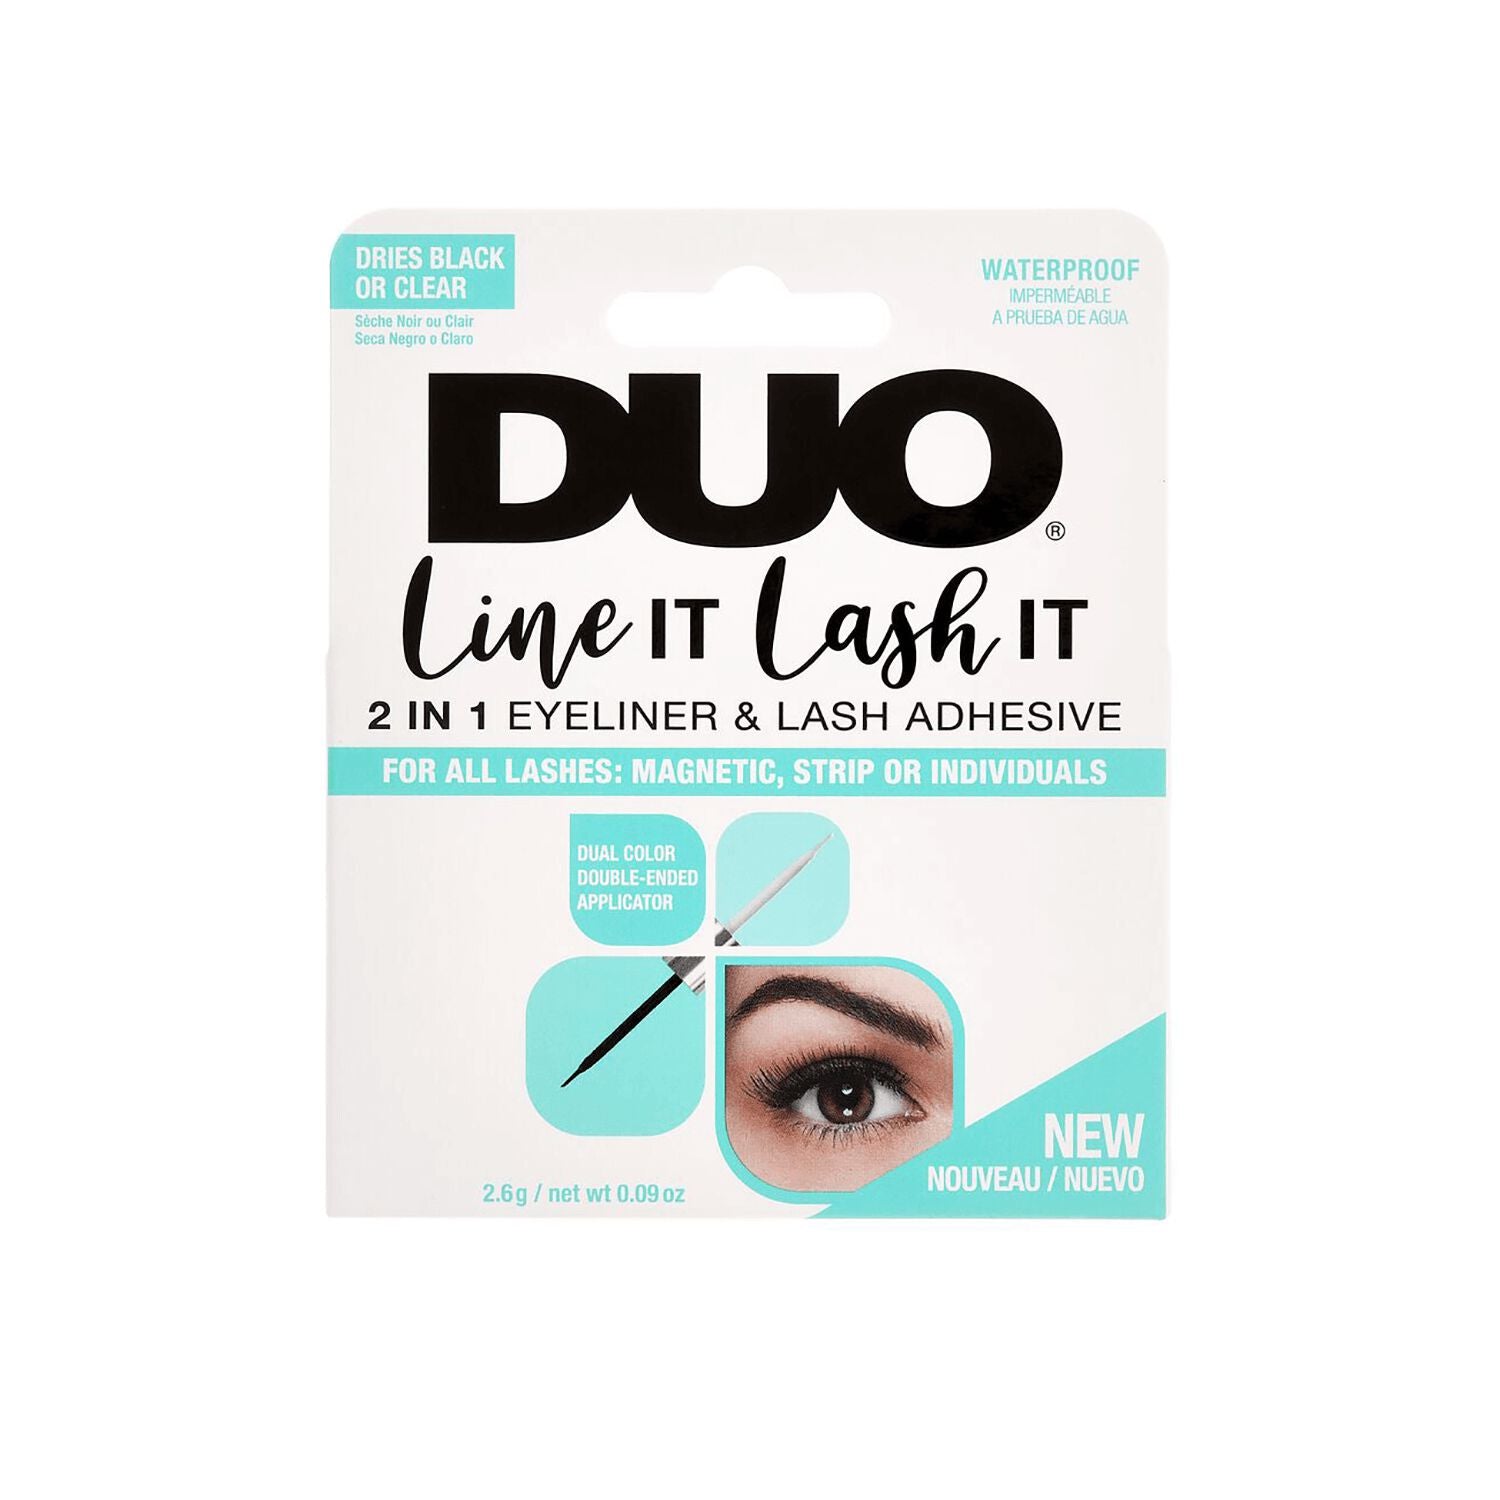 Lash Glue and Remover  by   Ardell DUO Dual Line It Lash It Black & Clear